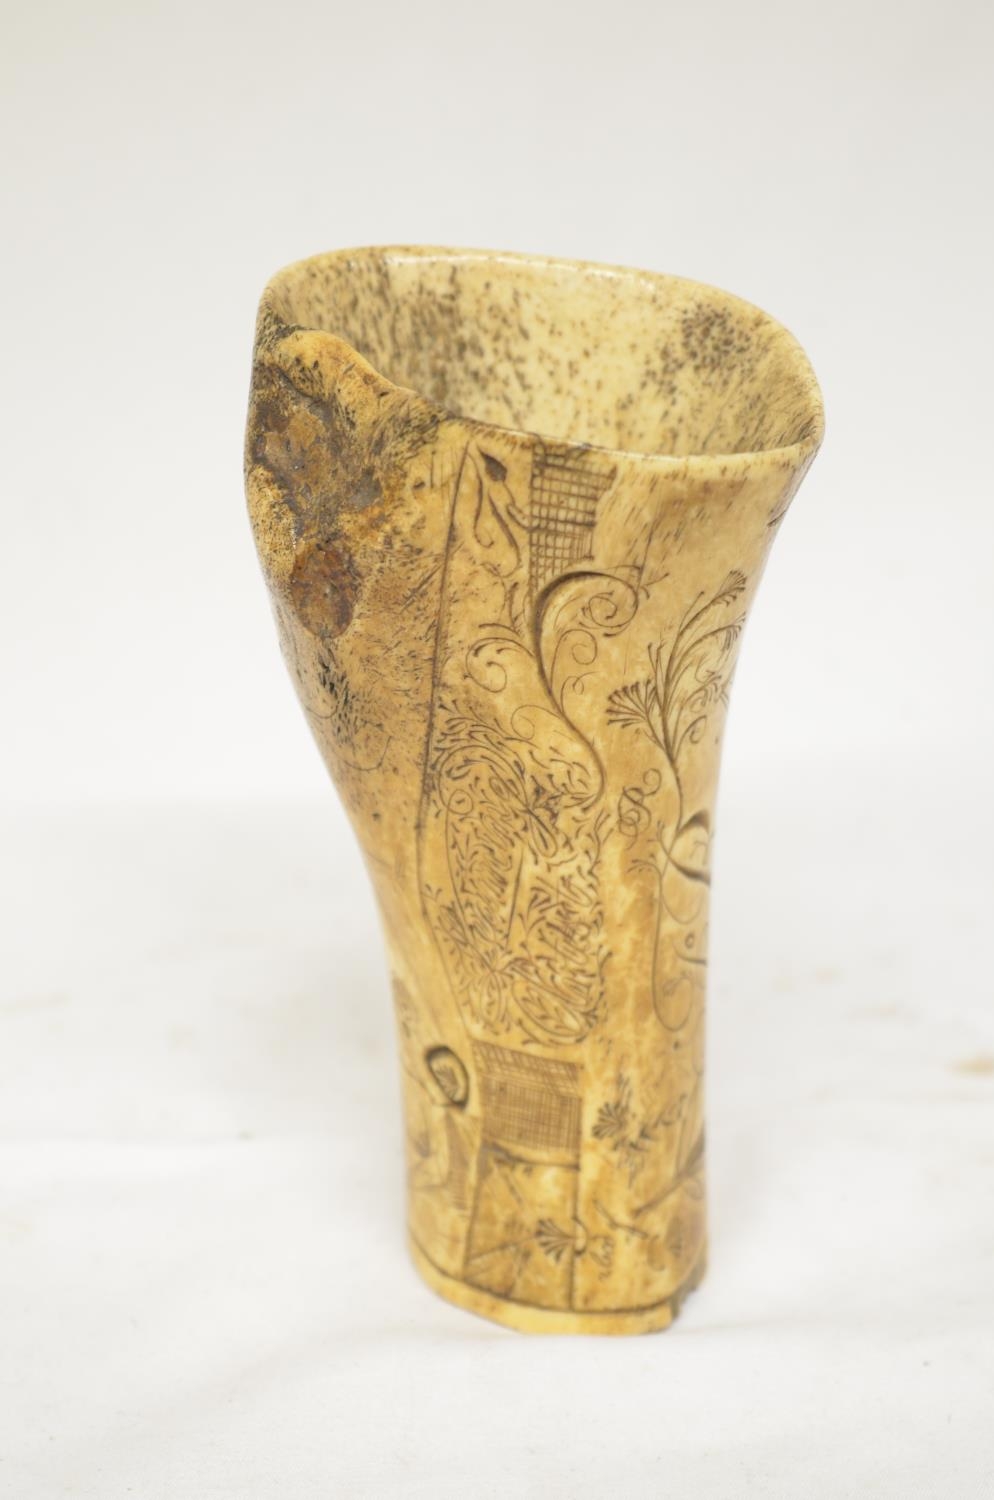 Bone quill holder with scrimshaw design including alphabet, numbers, animals and various symbols and - Image 3 of 6